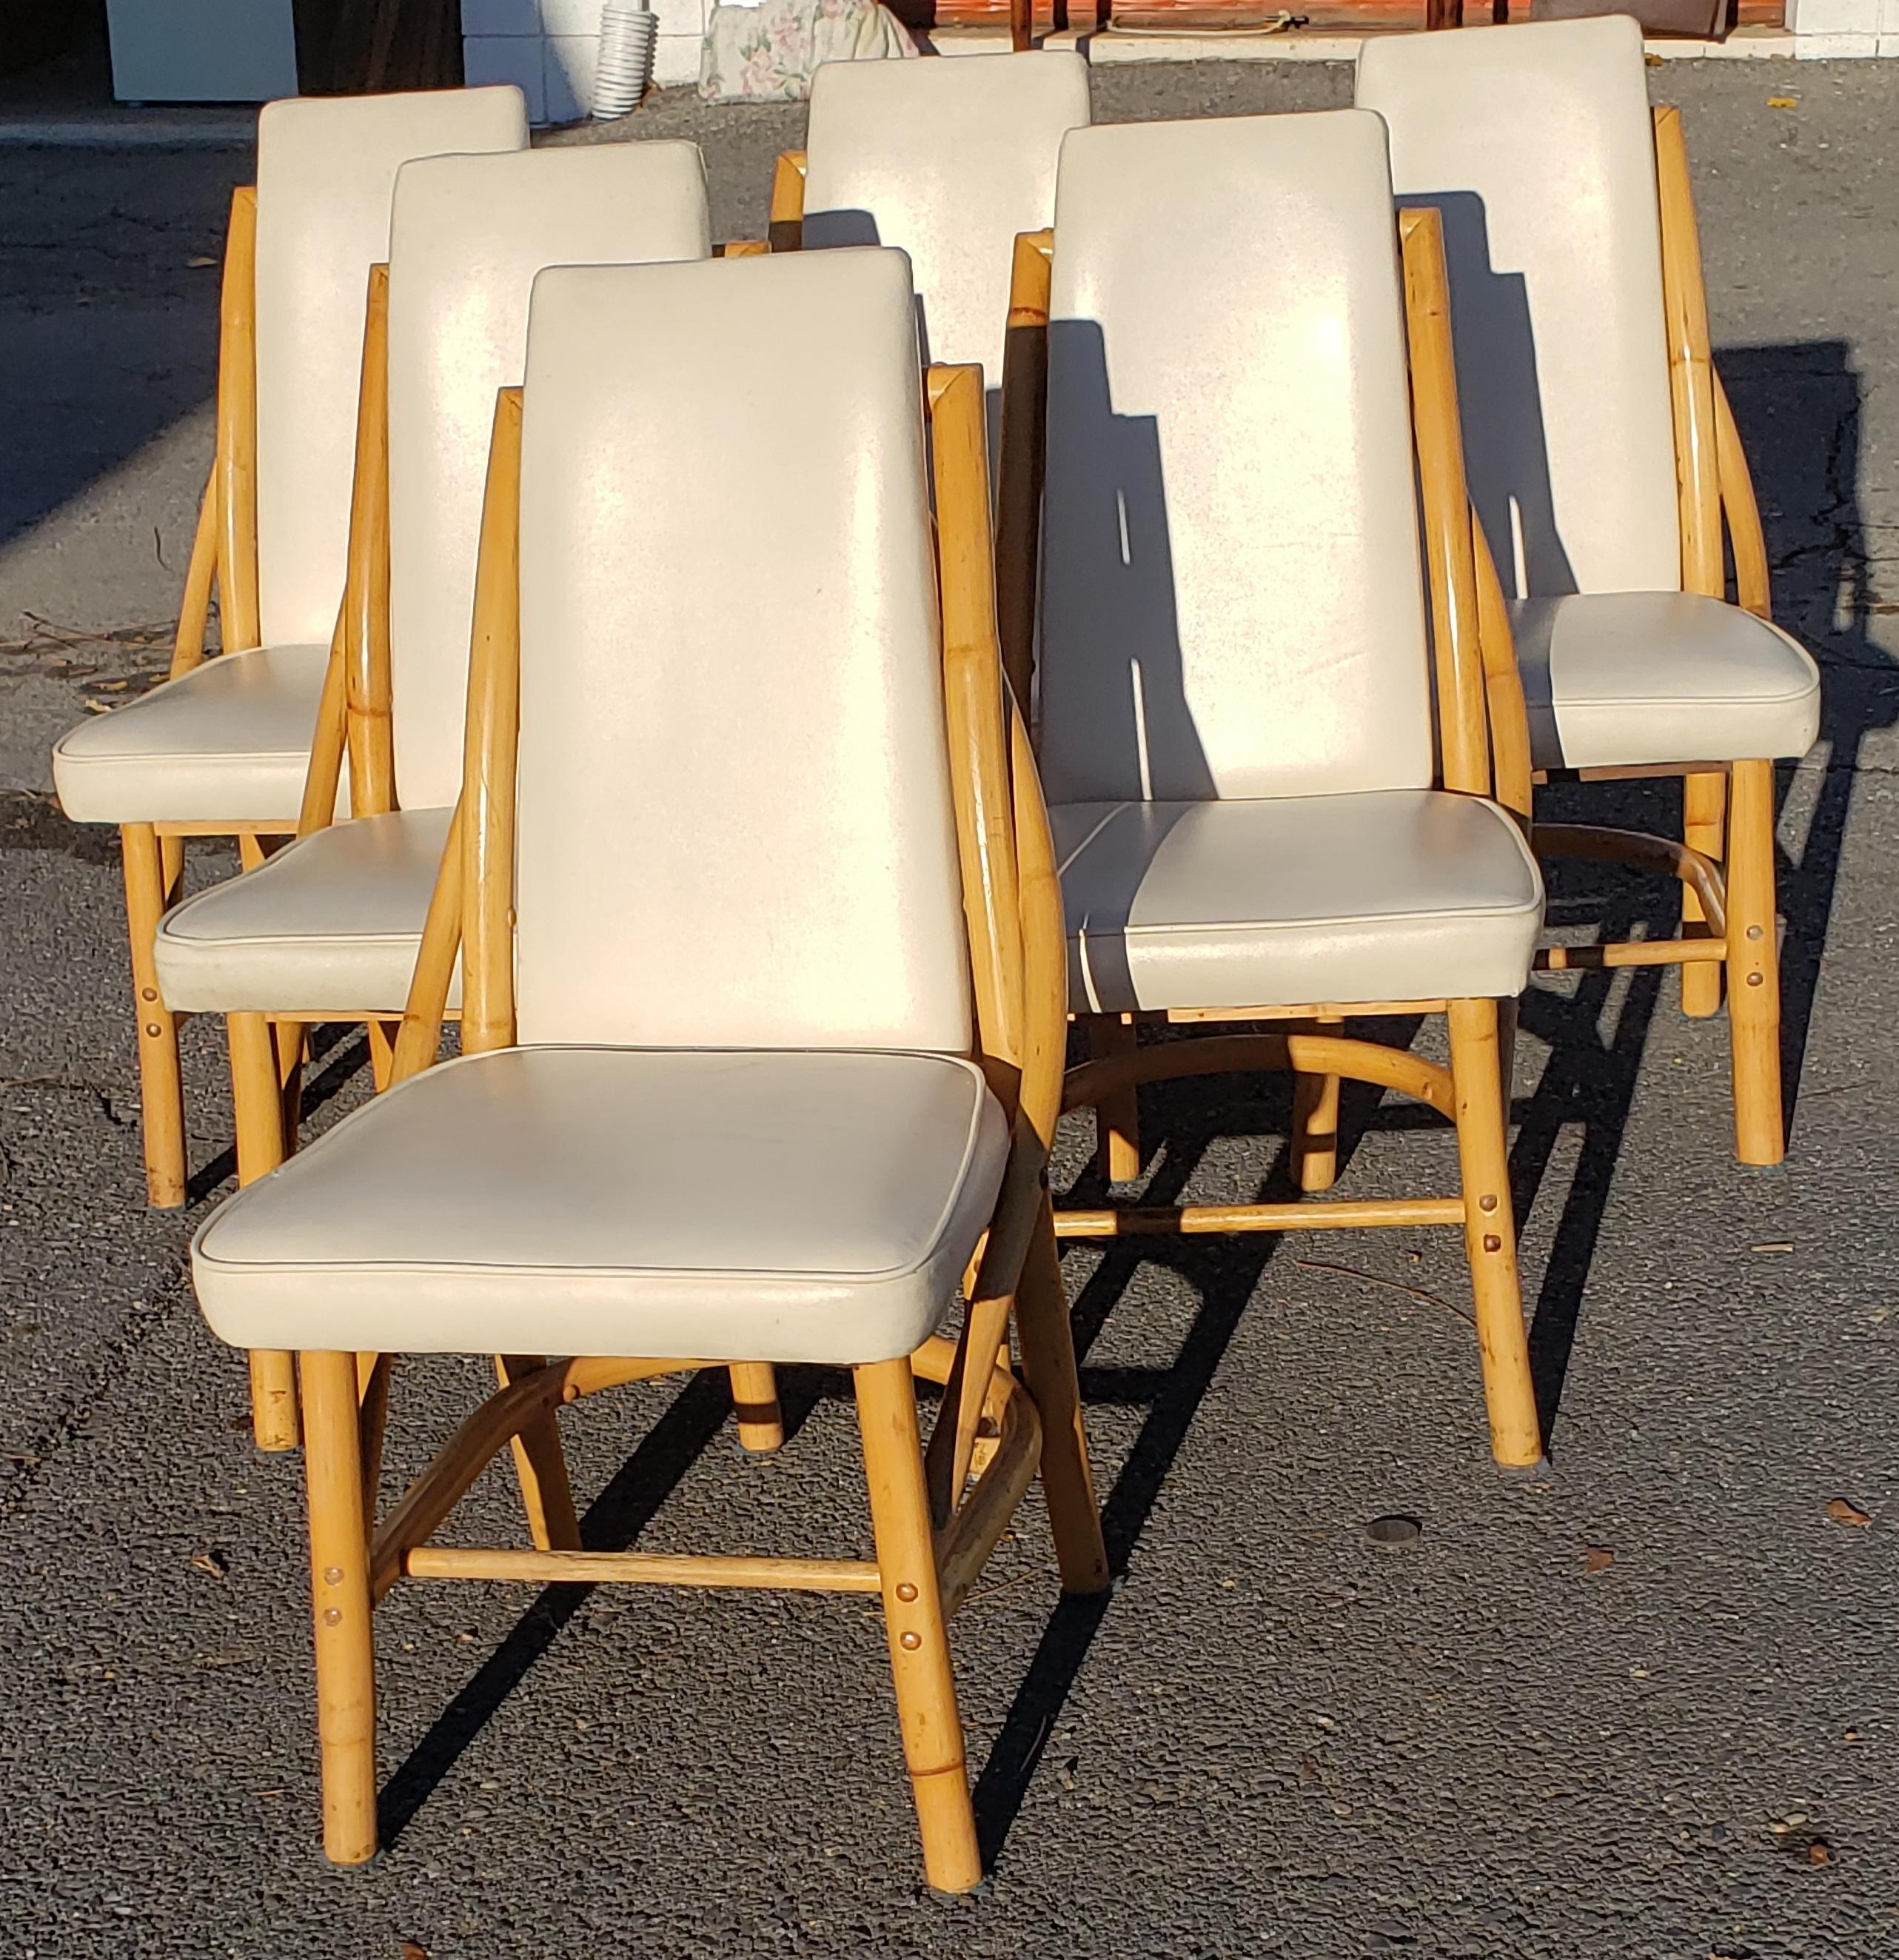 Hand-Crafted Bam Tan Rattan Bamboo Dining Chairs, Circa 1960s For Sale